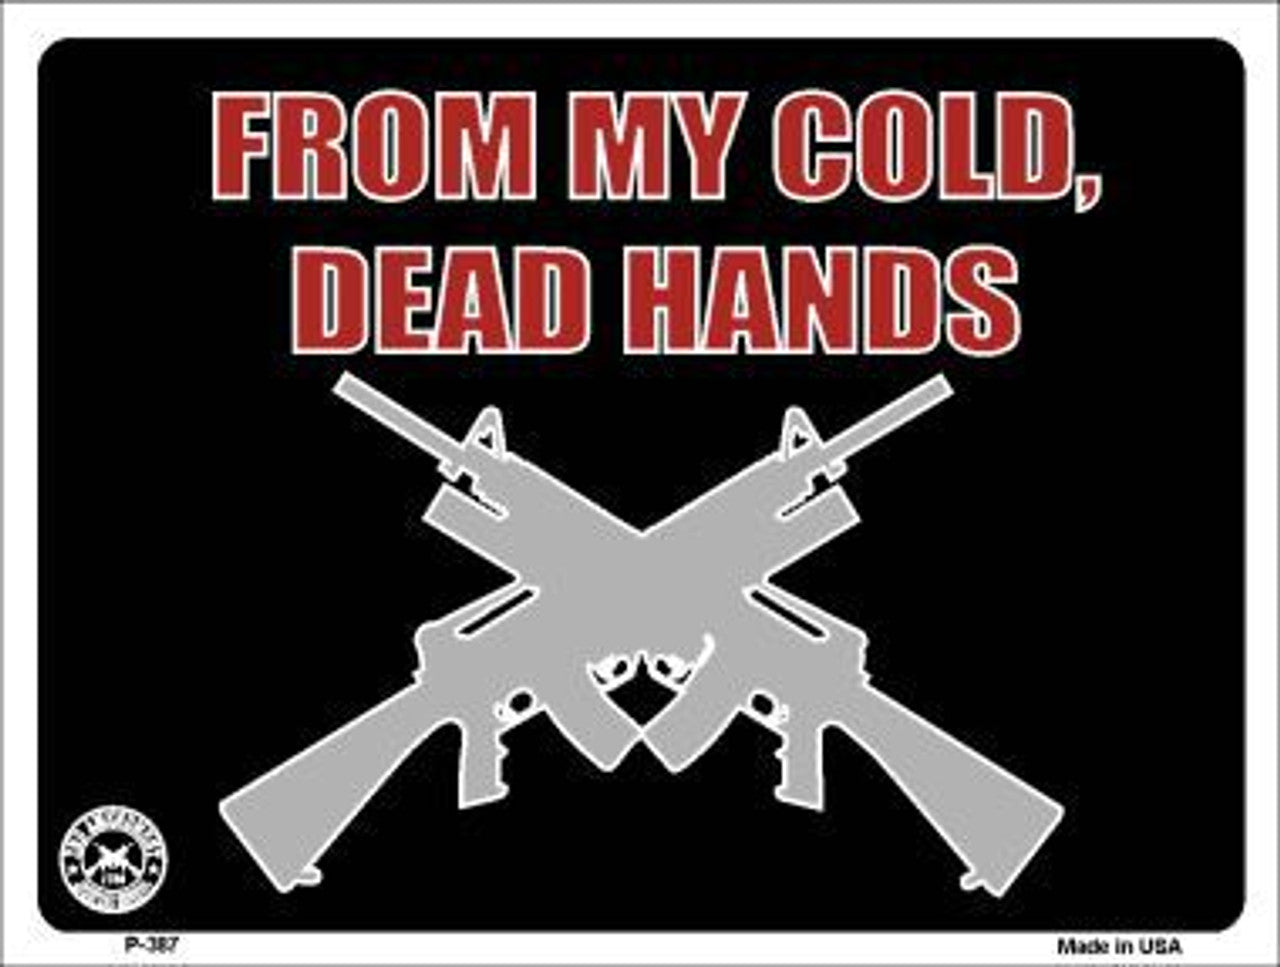 From My Cold Dead Hands 9" x 12" Aluminum Metal Parking Sign P-387